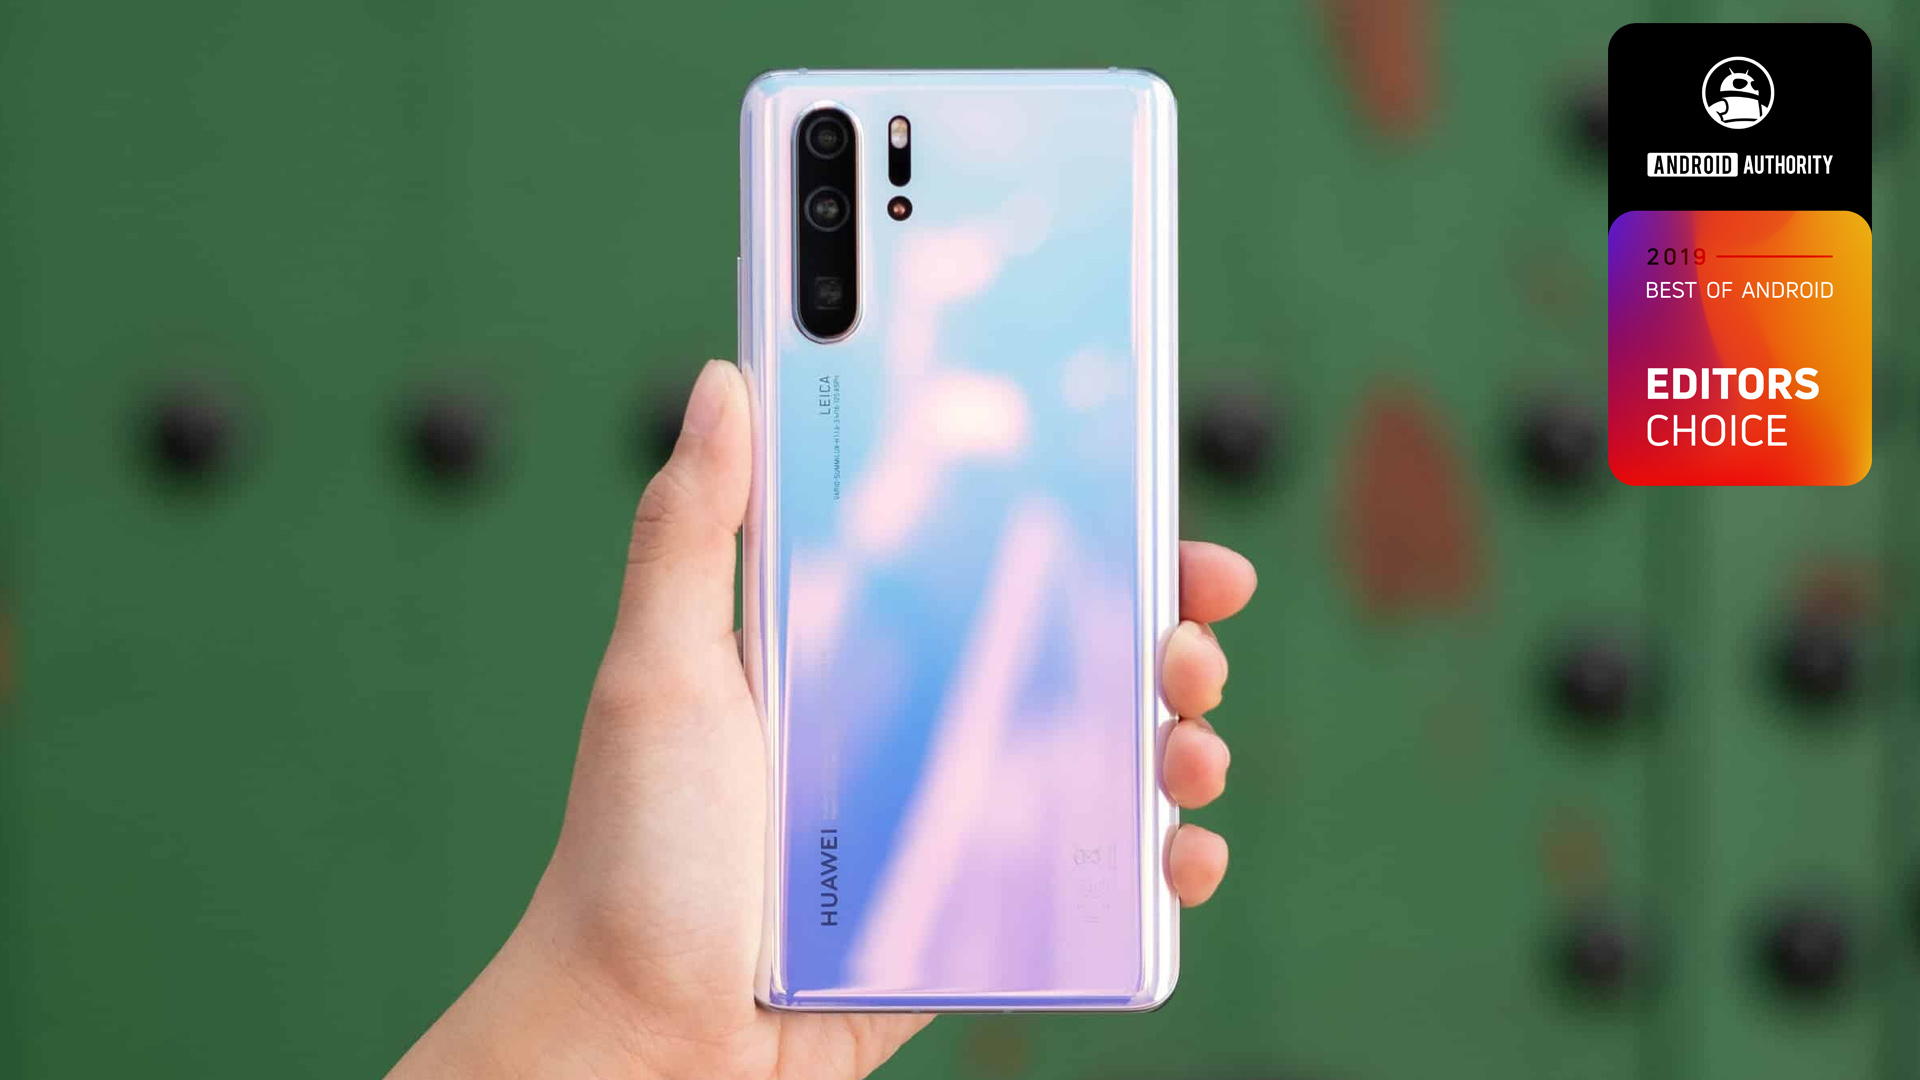 huawei p30 pro best of android editors choice 2019